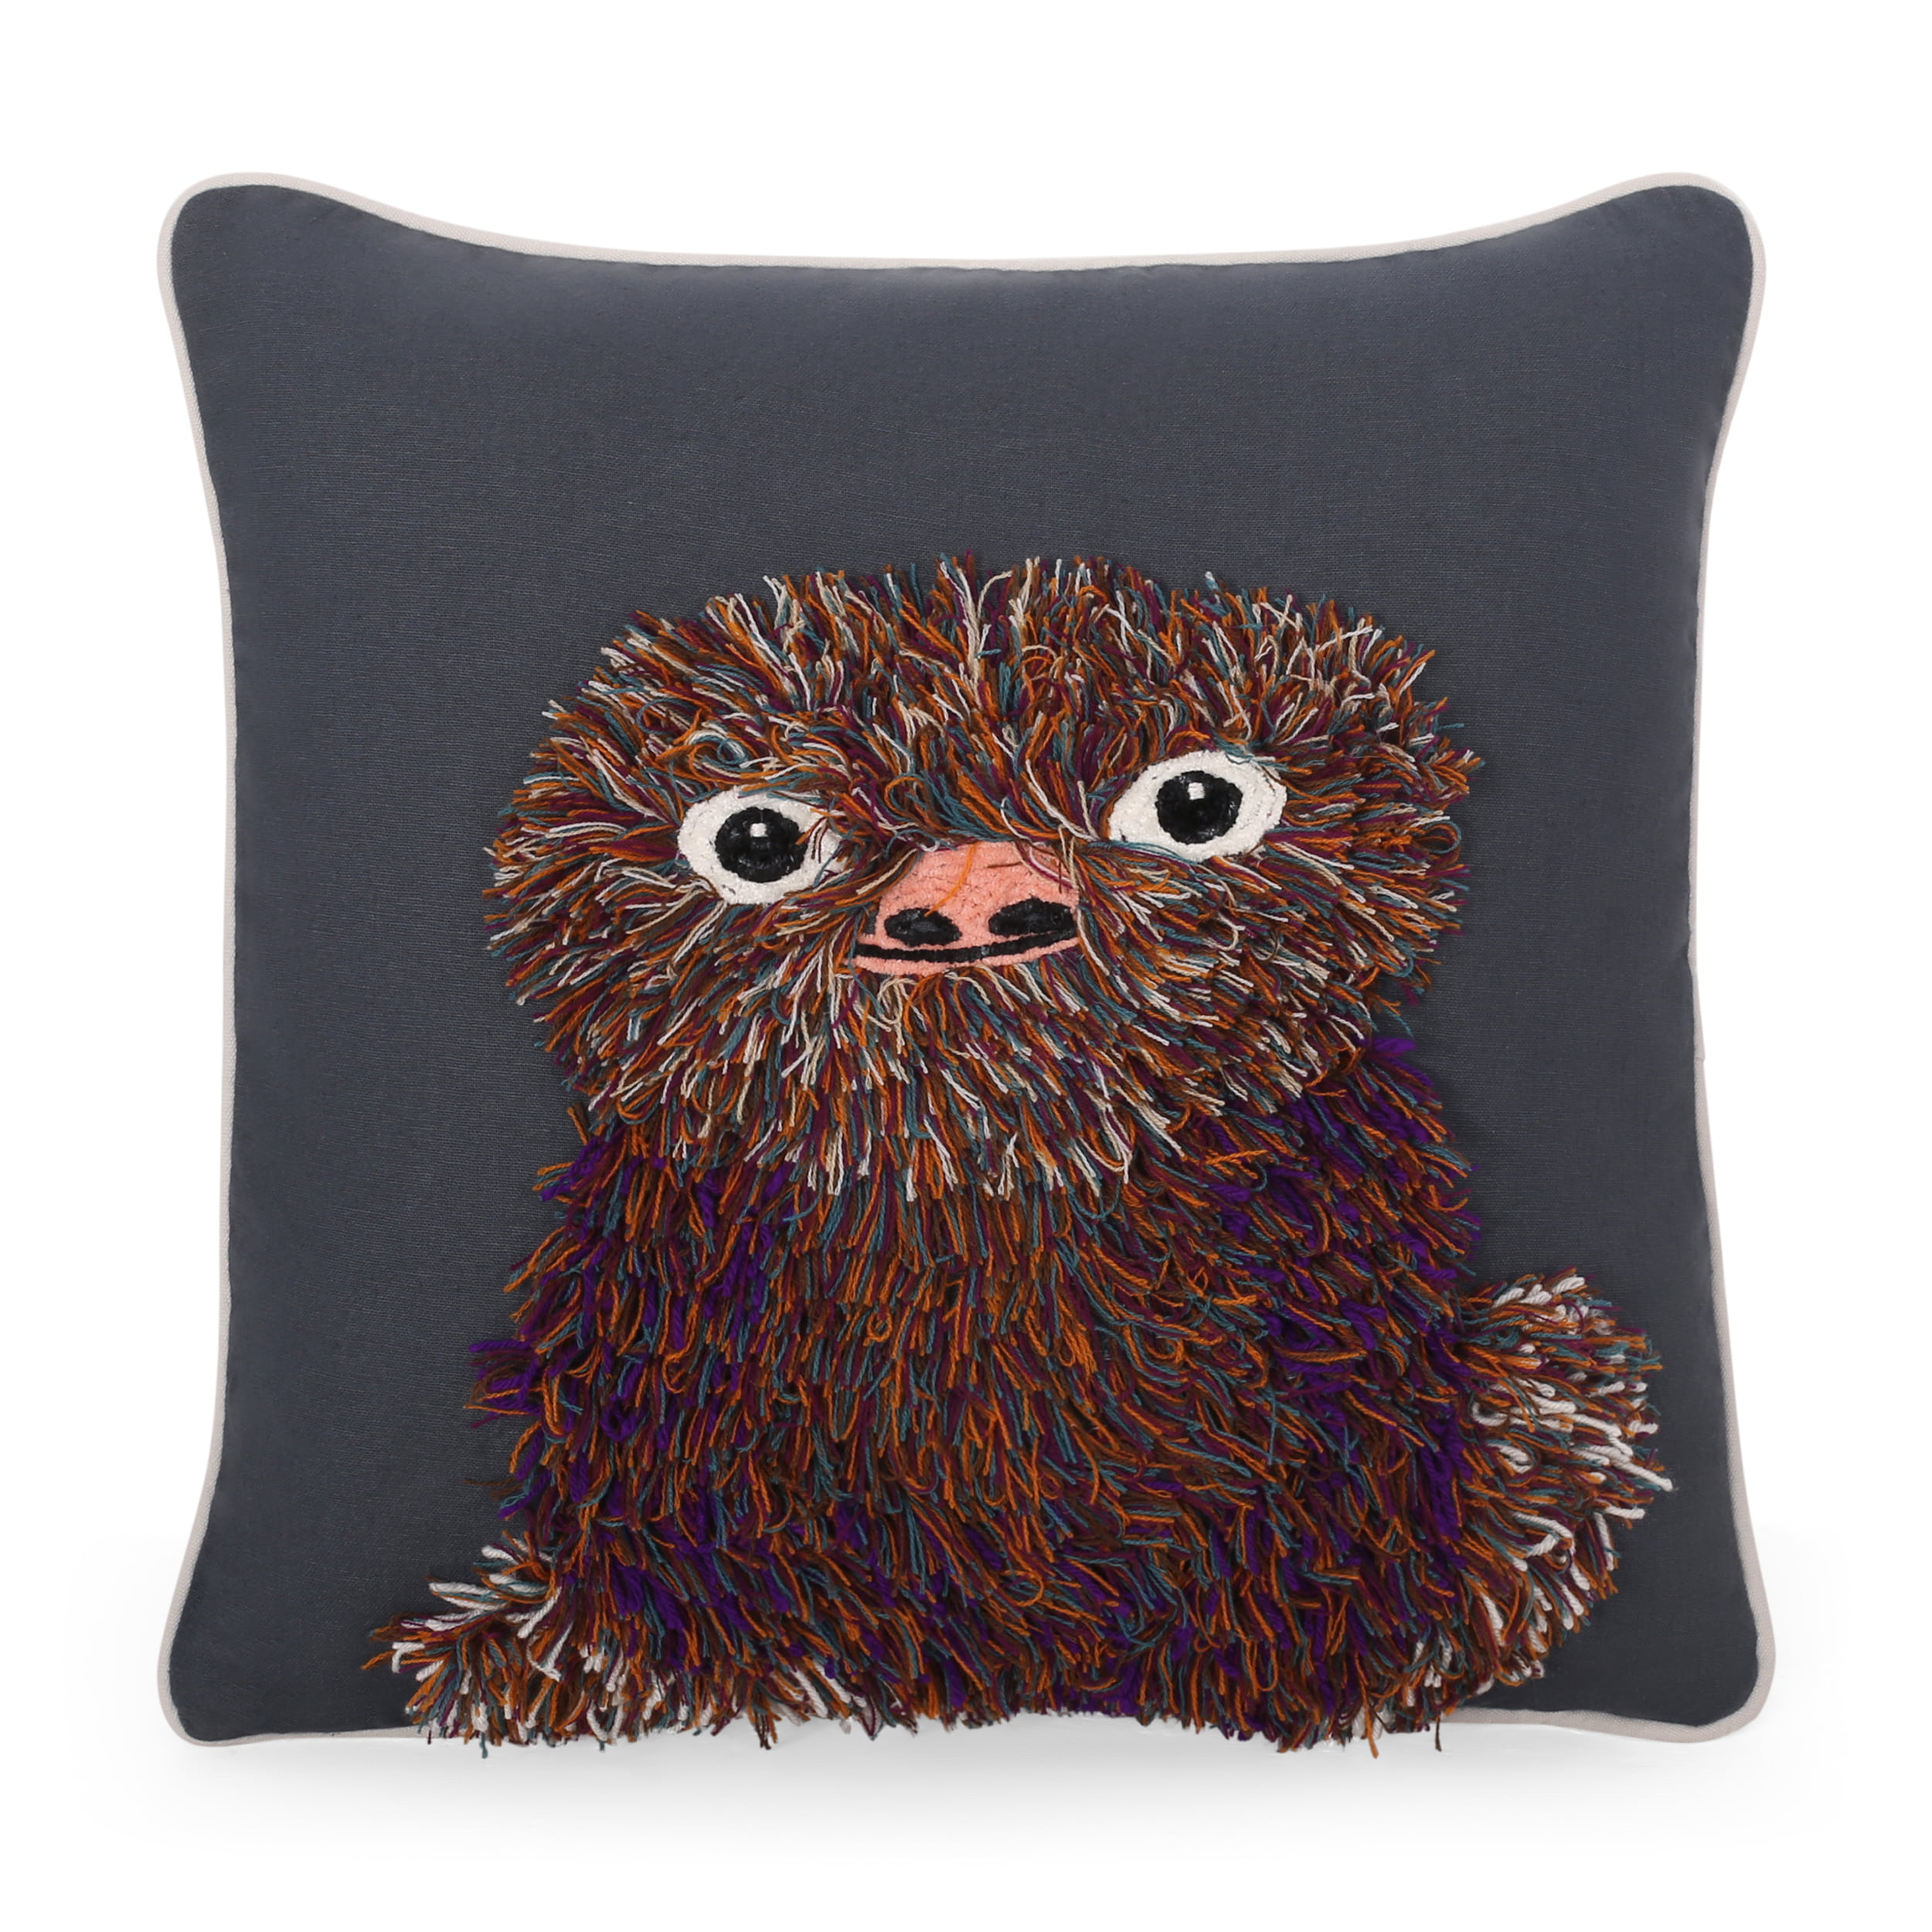 16x16 Multicolor Sloth Pattern & Gifts Sloth Throw Pillow